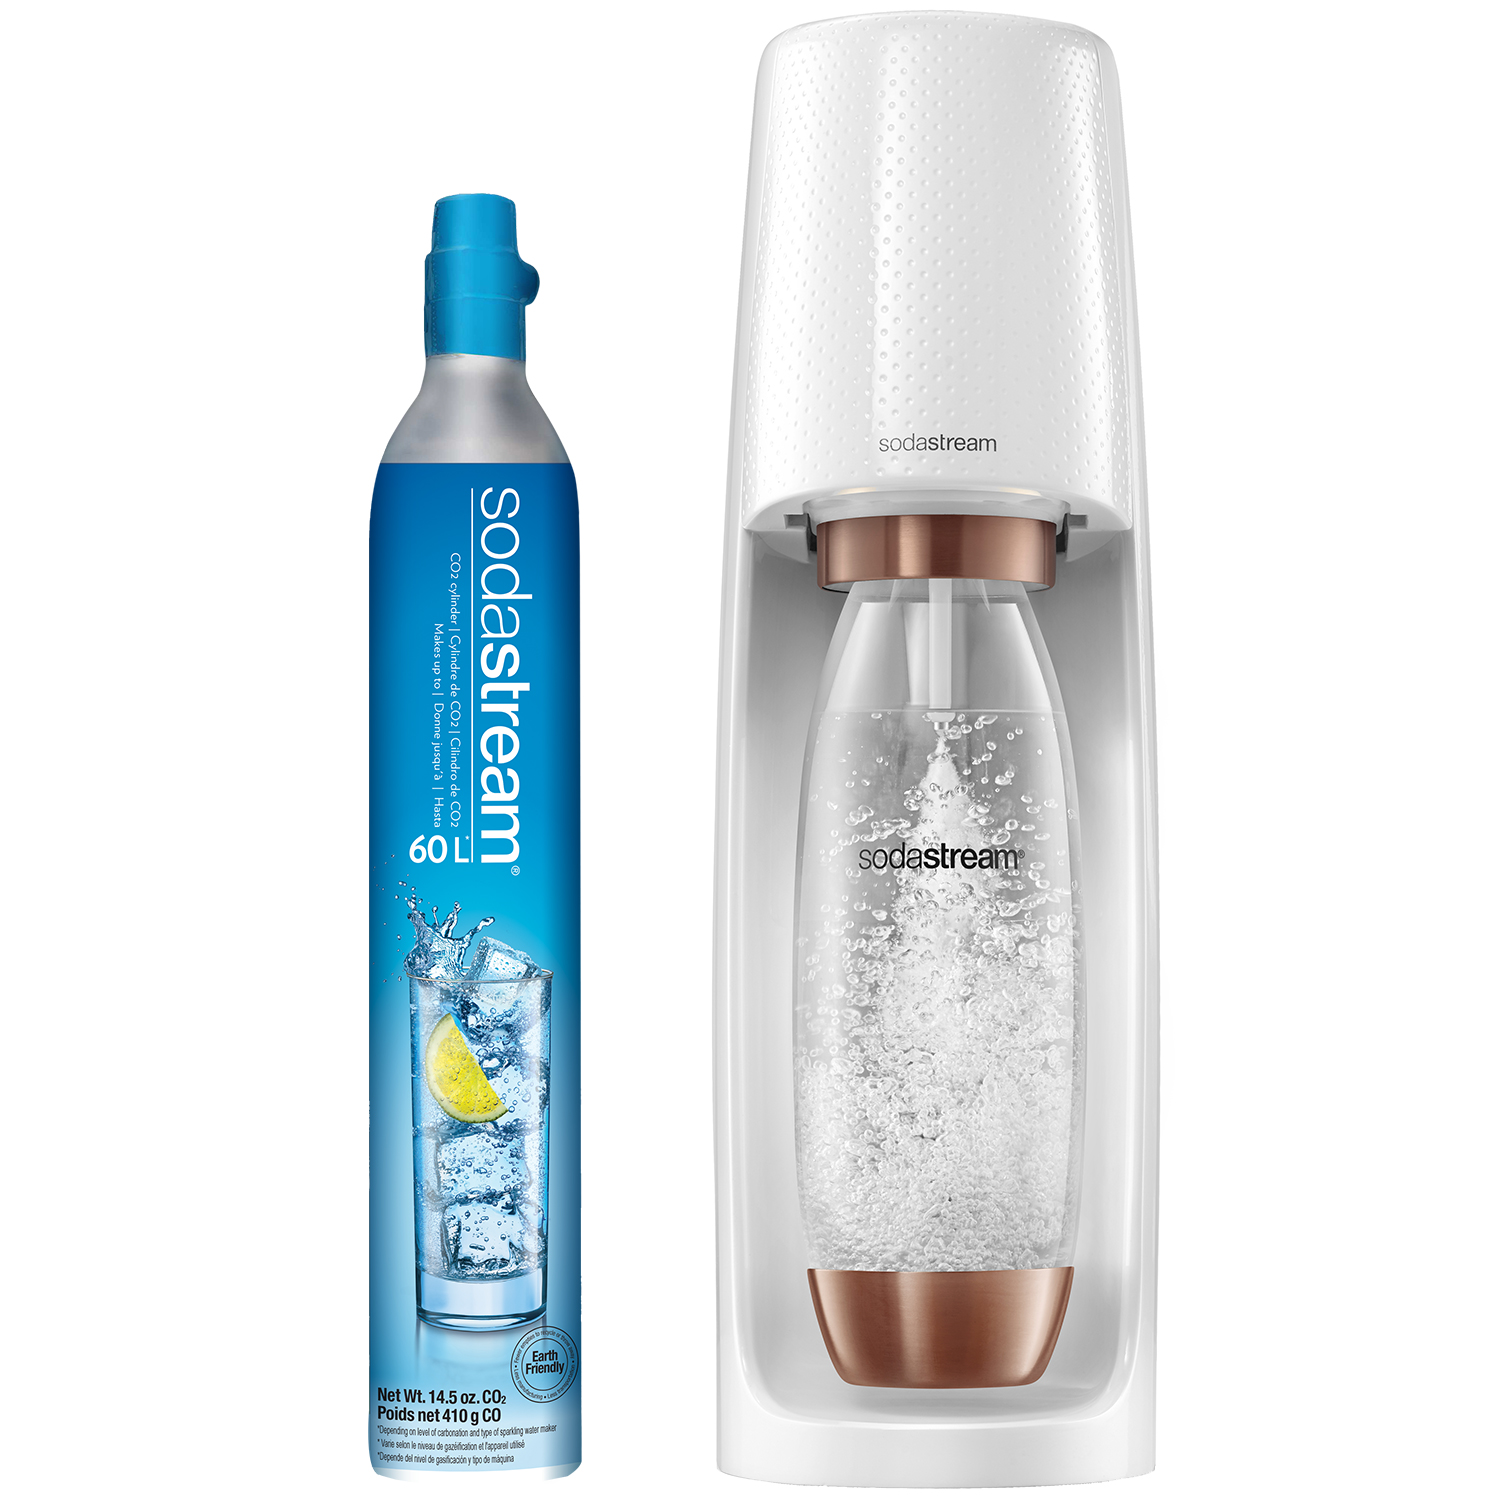 SodaStream Fizzi Sparkling Water Maker (White and Rose Gold) with CO2 and BPA free Bottle - image 1 of 7